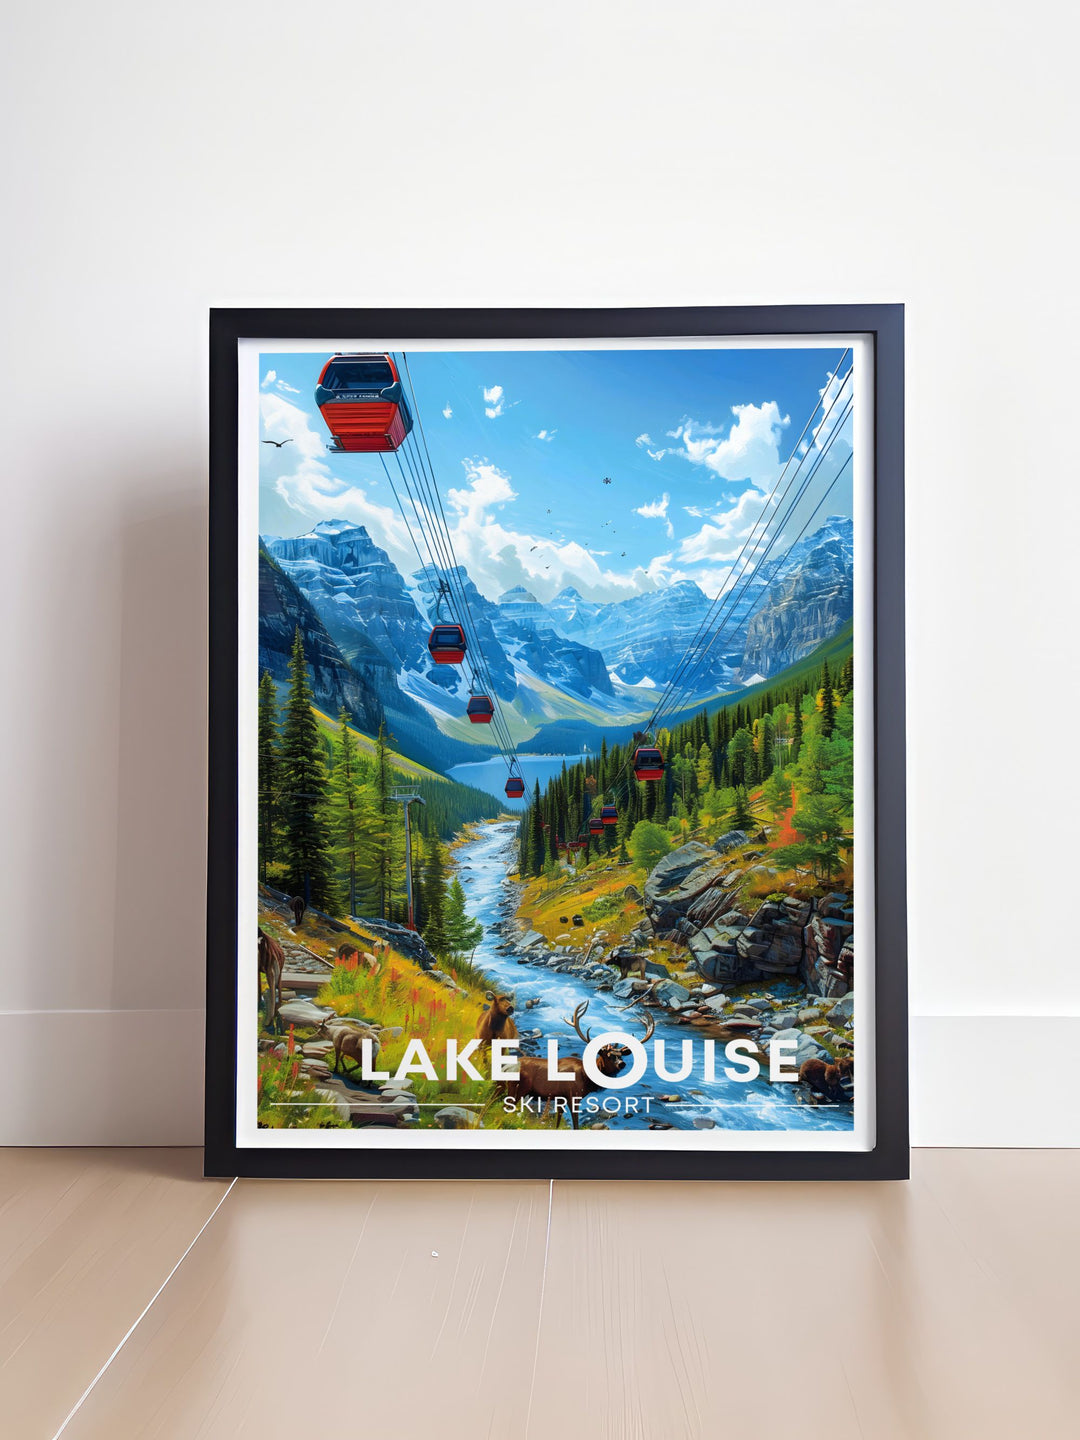 An illustration highlighting the scenic ride on the Lake Louise Gondola, showcasing the majestic peaks and vibrant colors of the Canadian Rockies, perfect for your wall decor.